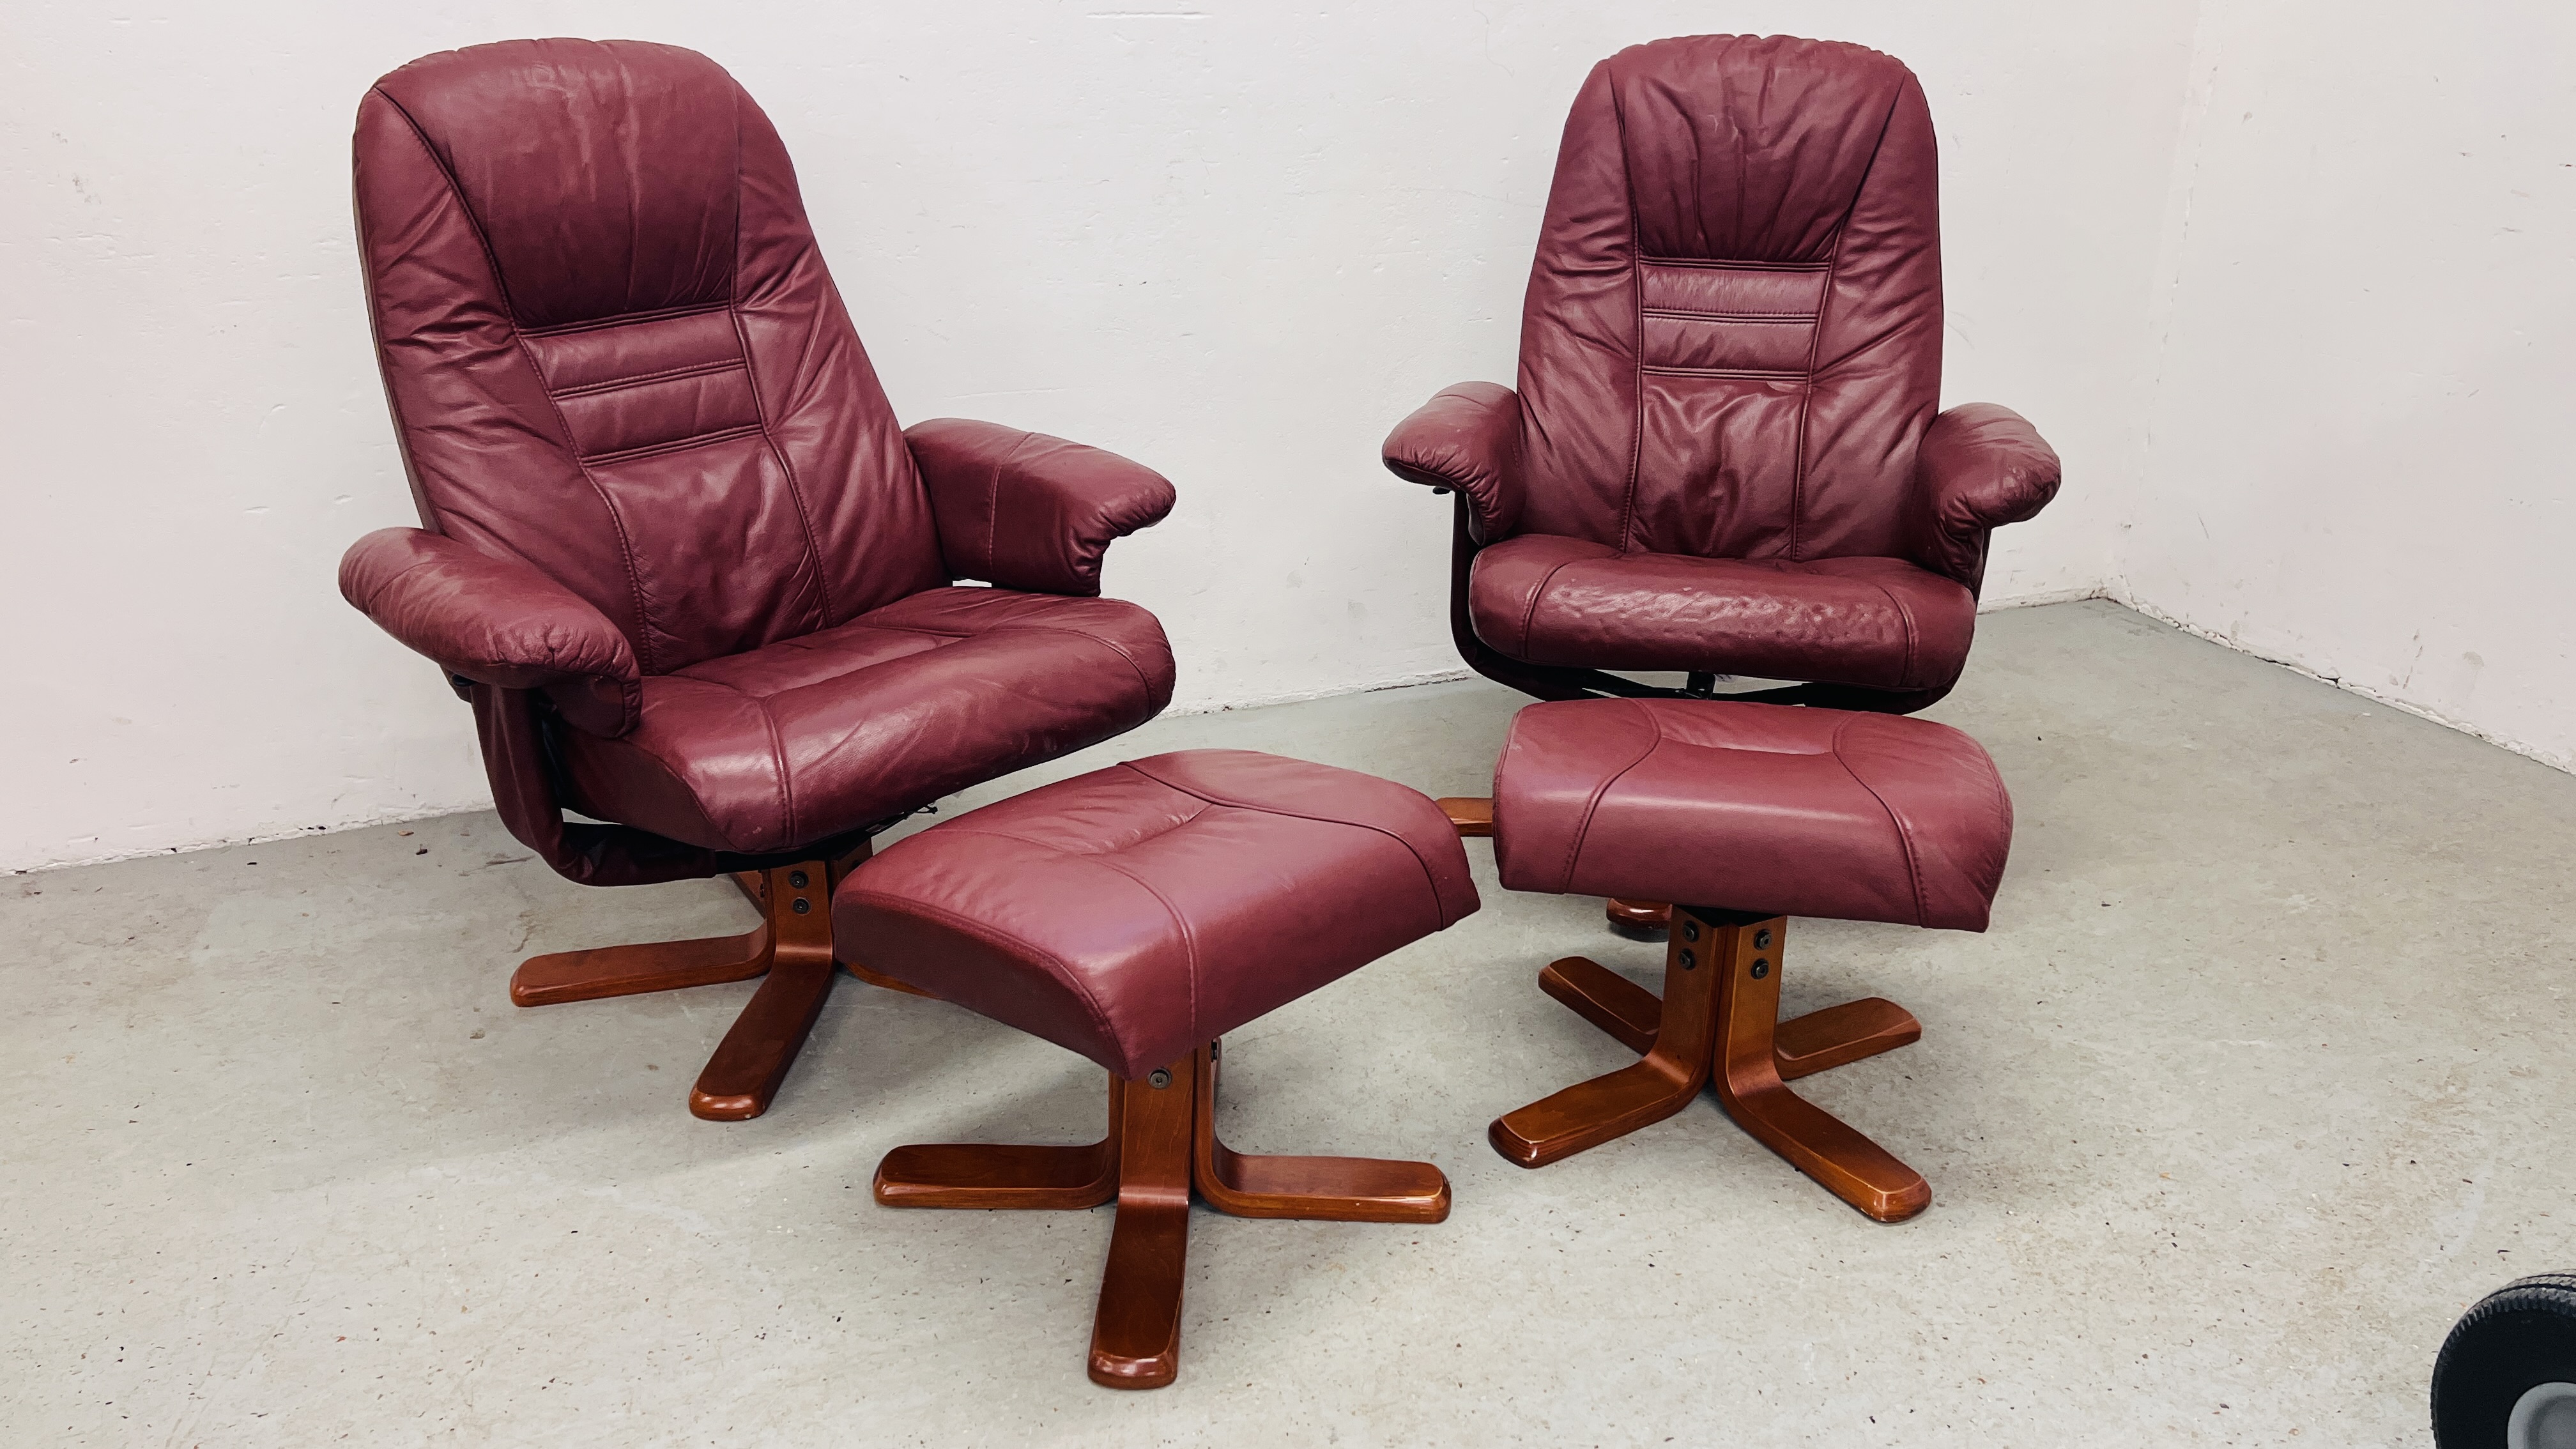 A PAIR OF RED LEATHER REVOLVING ARMCHAIRS WITH FOOTSTOOLS.